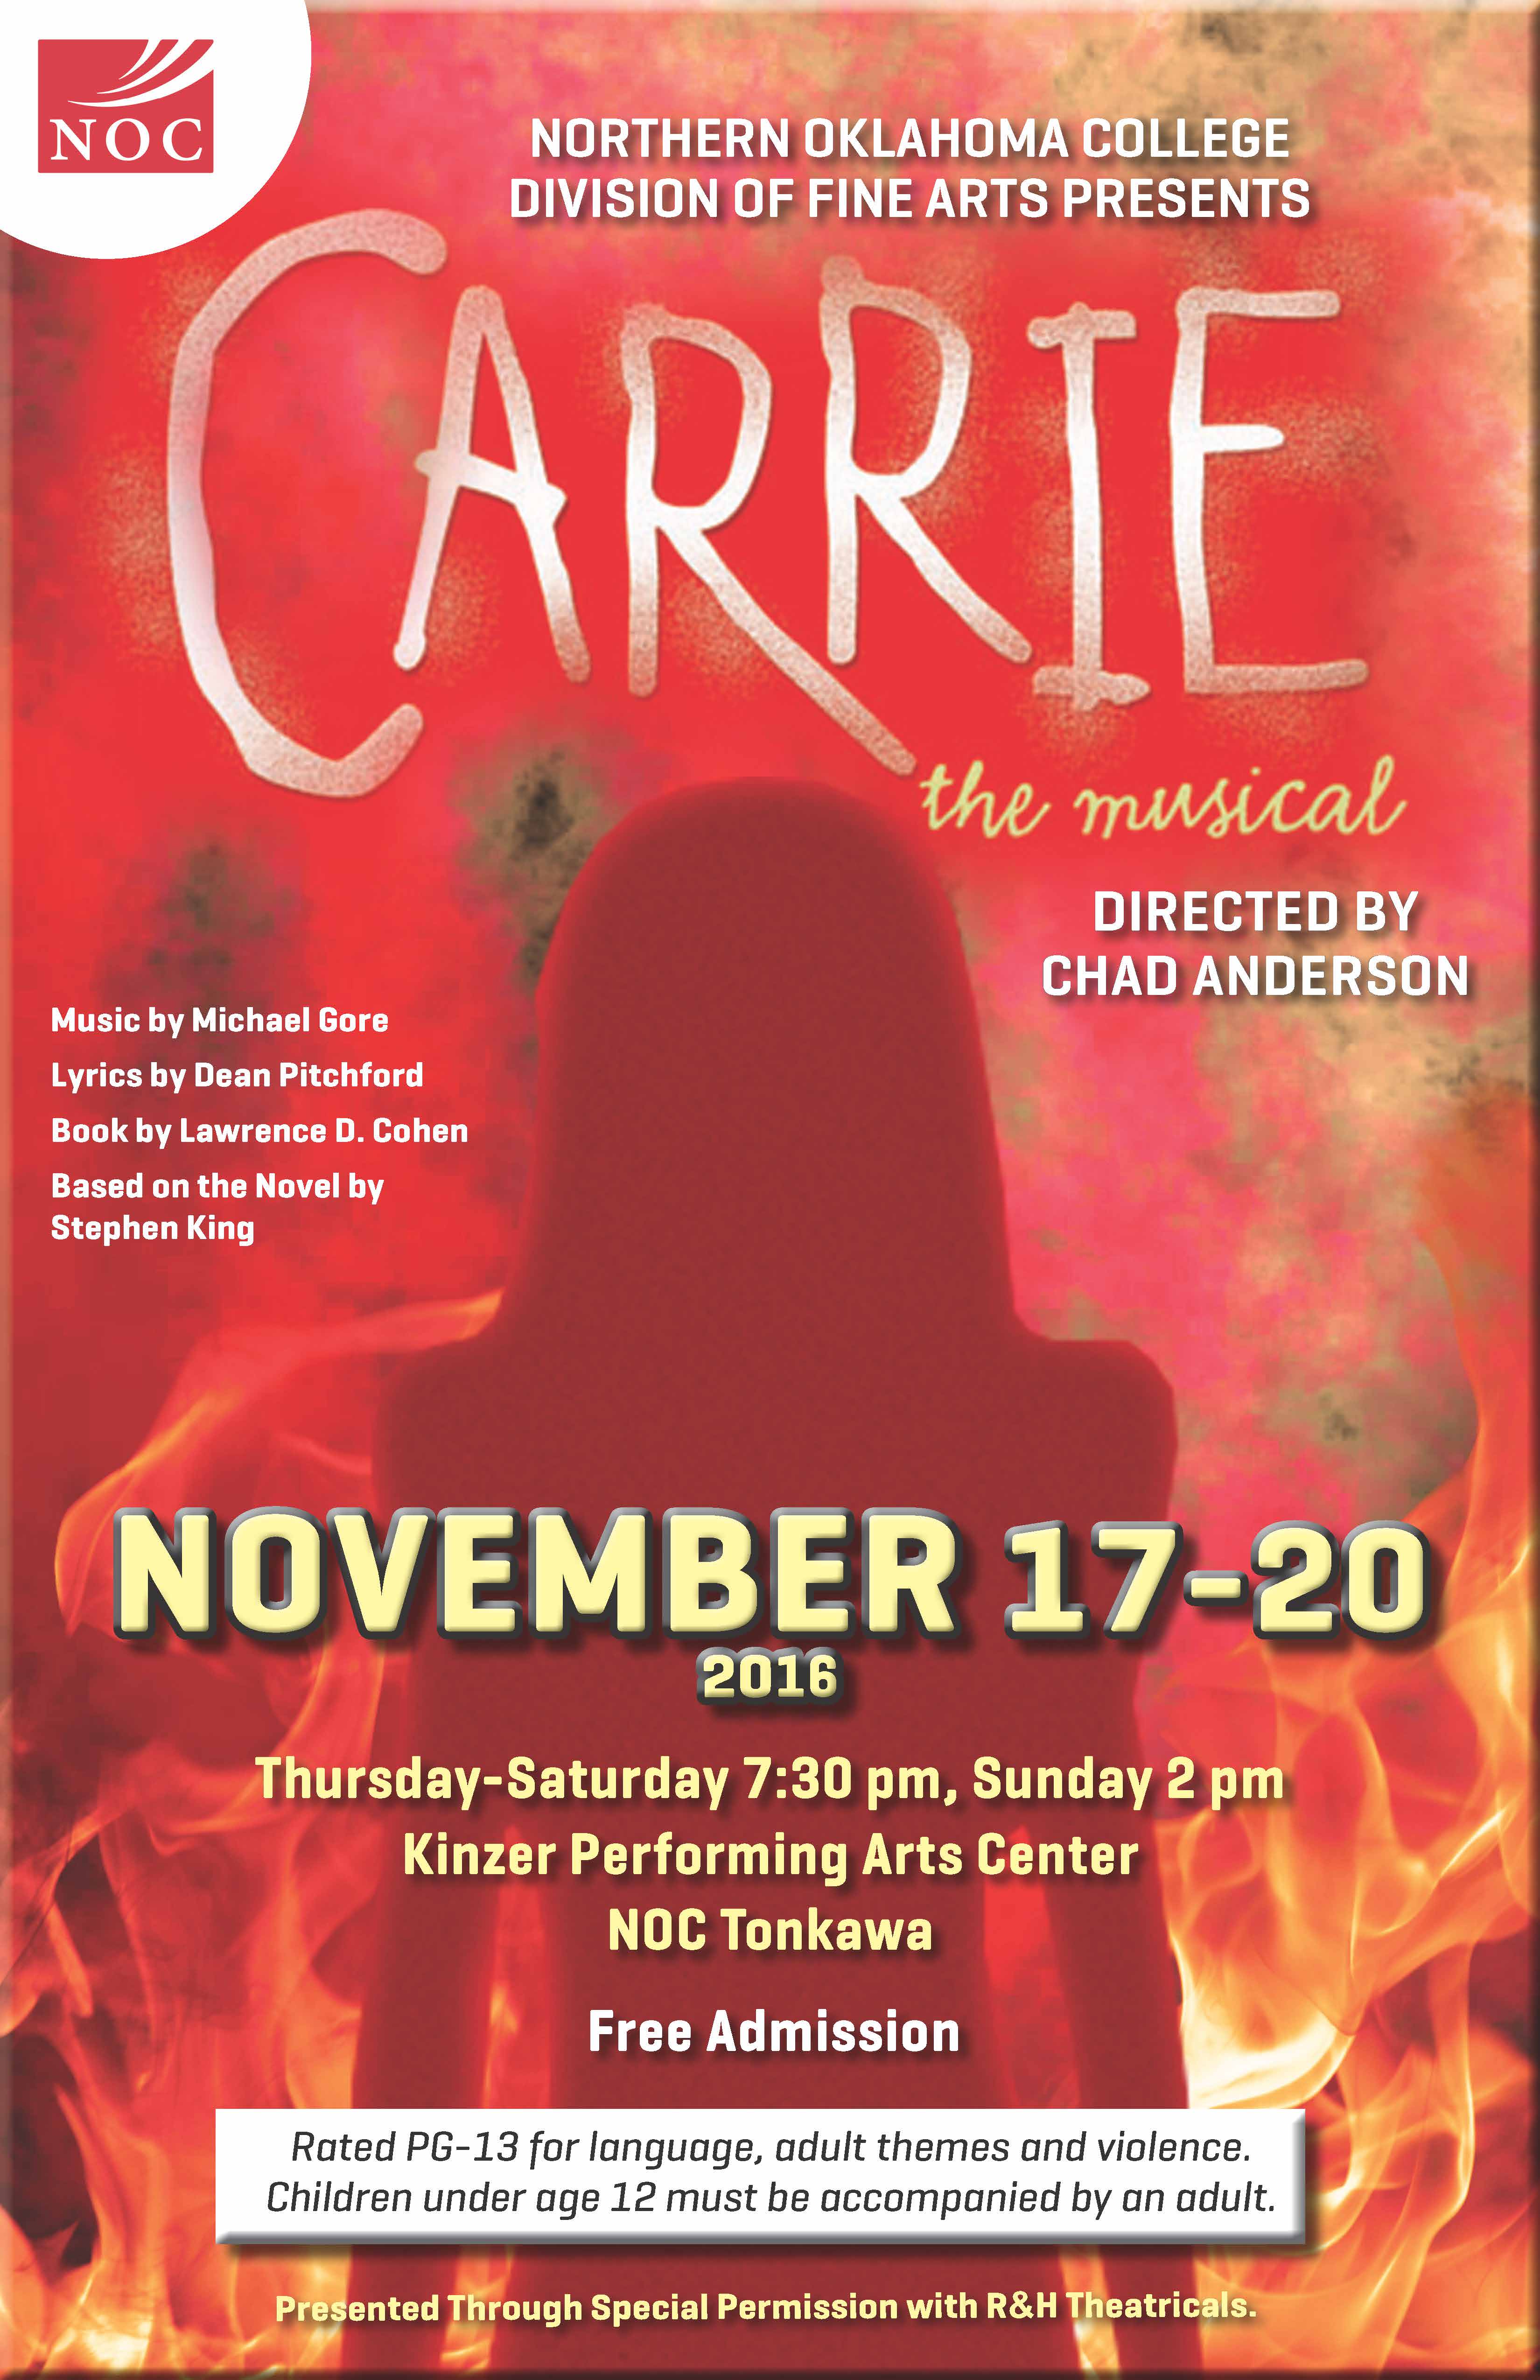 NOC presenting ‘Carrie the Musical’ this weekend